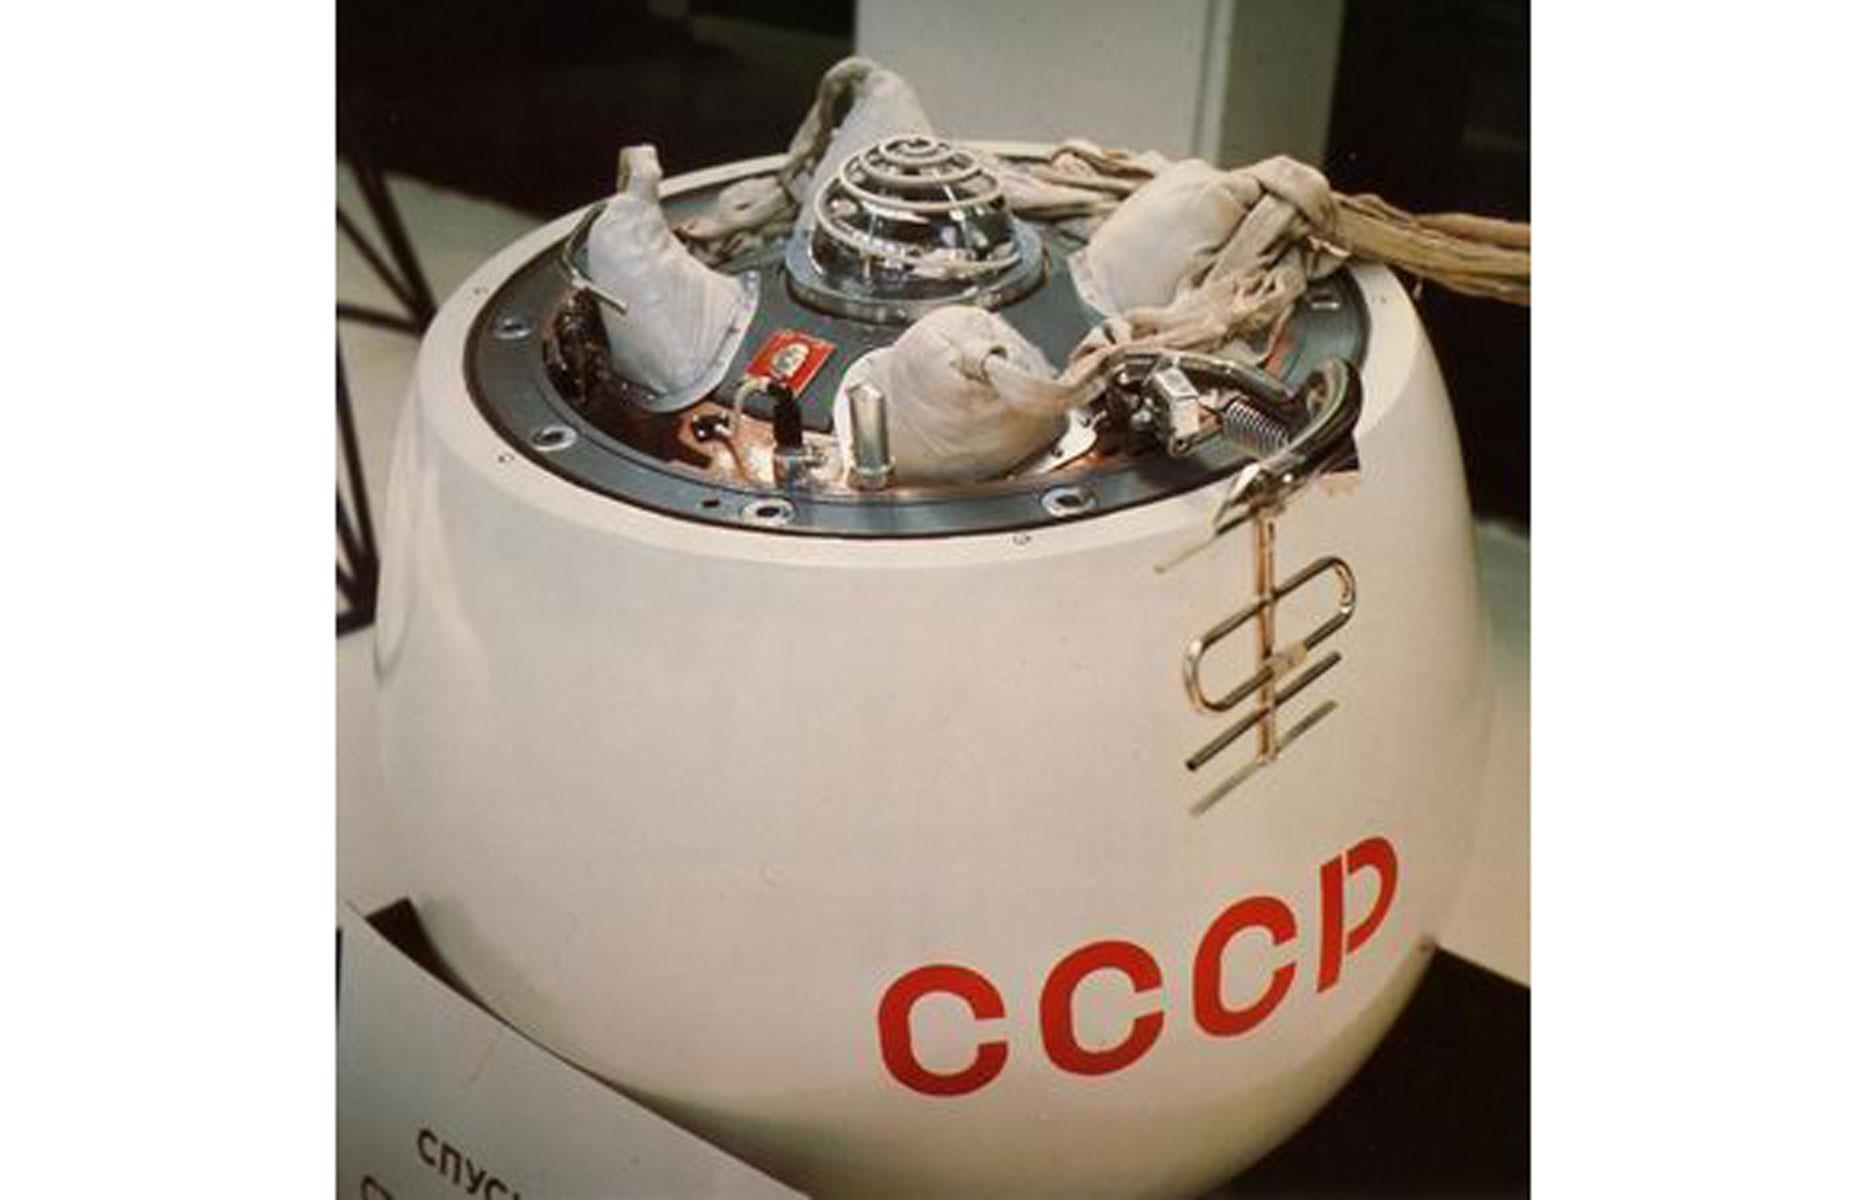 The first spacecraft to land on another planet, the USSR's Venera 7 touched down on Venus on 15 December 1970. The lander didn't last long at all on the planet's sizzling surface, which is hot enough to melt aluminum and lead.